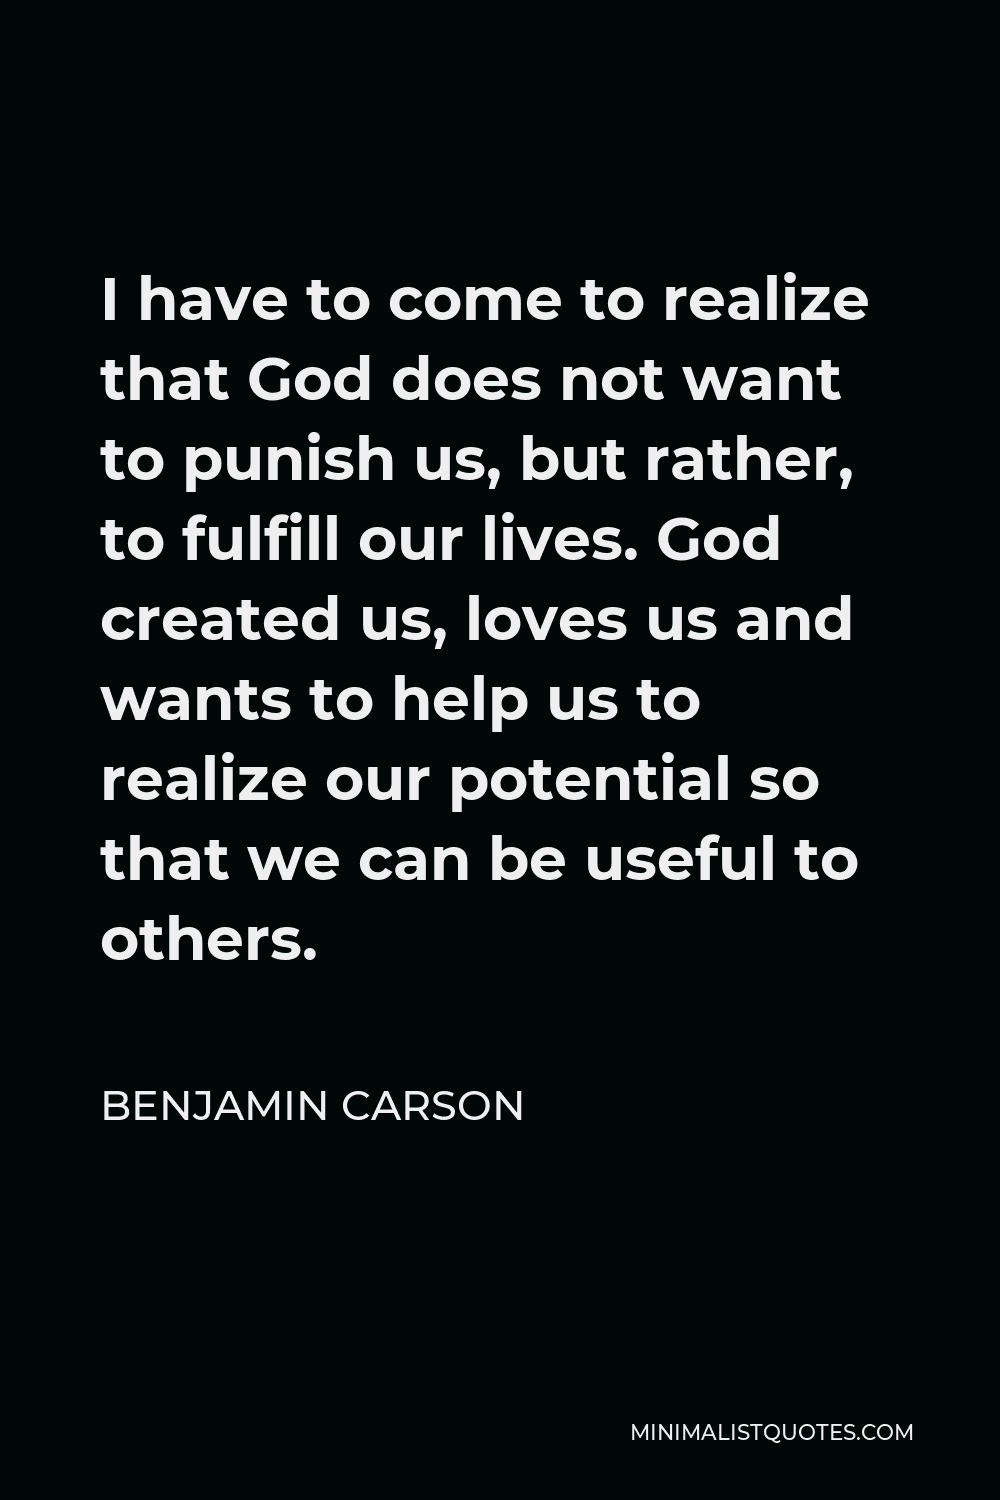 Benjamin Carson Quote - I have to come to realize that God does not want to punish us, but rather, to fulfill our lives. God created us, loves us and wants to help us to realize our potential so that we can be useful to others.